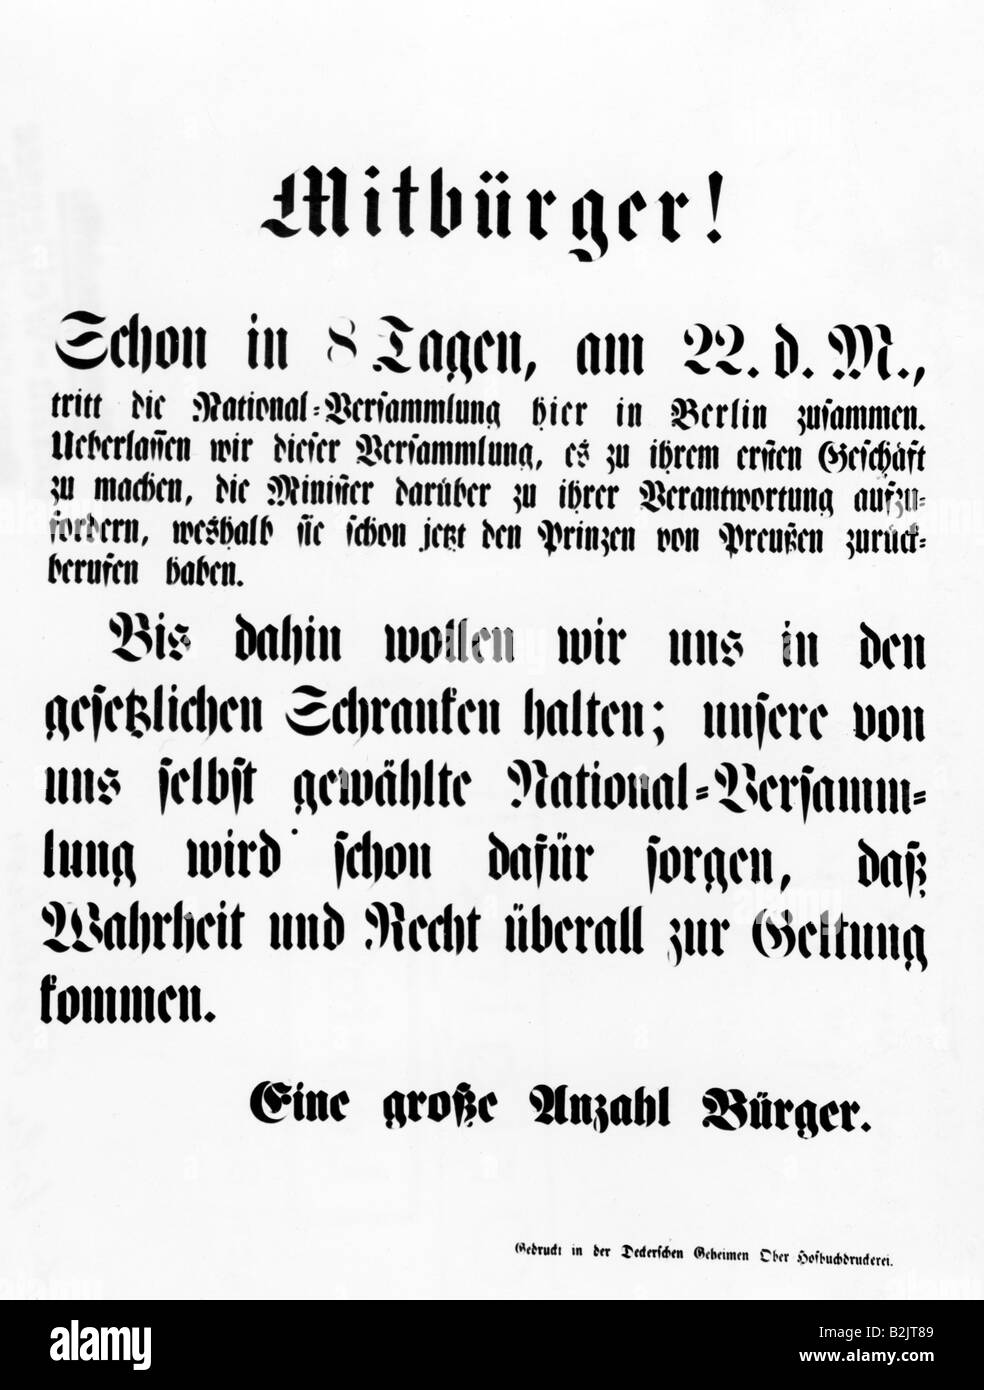 events, revolutions 1848 - 1849, Germany, Prussia, poster, announcement of the contitution of the Prussian National Assembly on 22.5.1848, Berlin, 14.5.1848, parliament, revolution, 19th century, historic, historical, Stock Photo